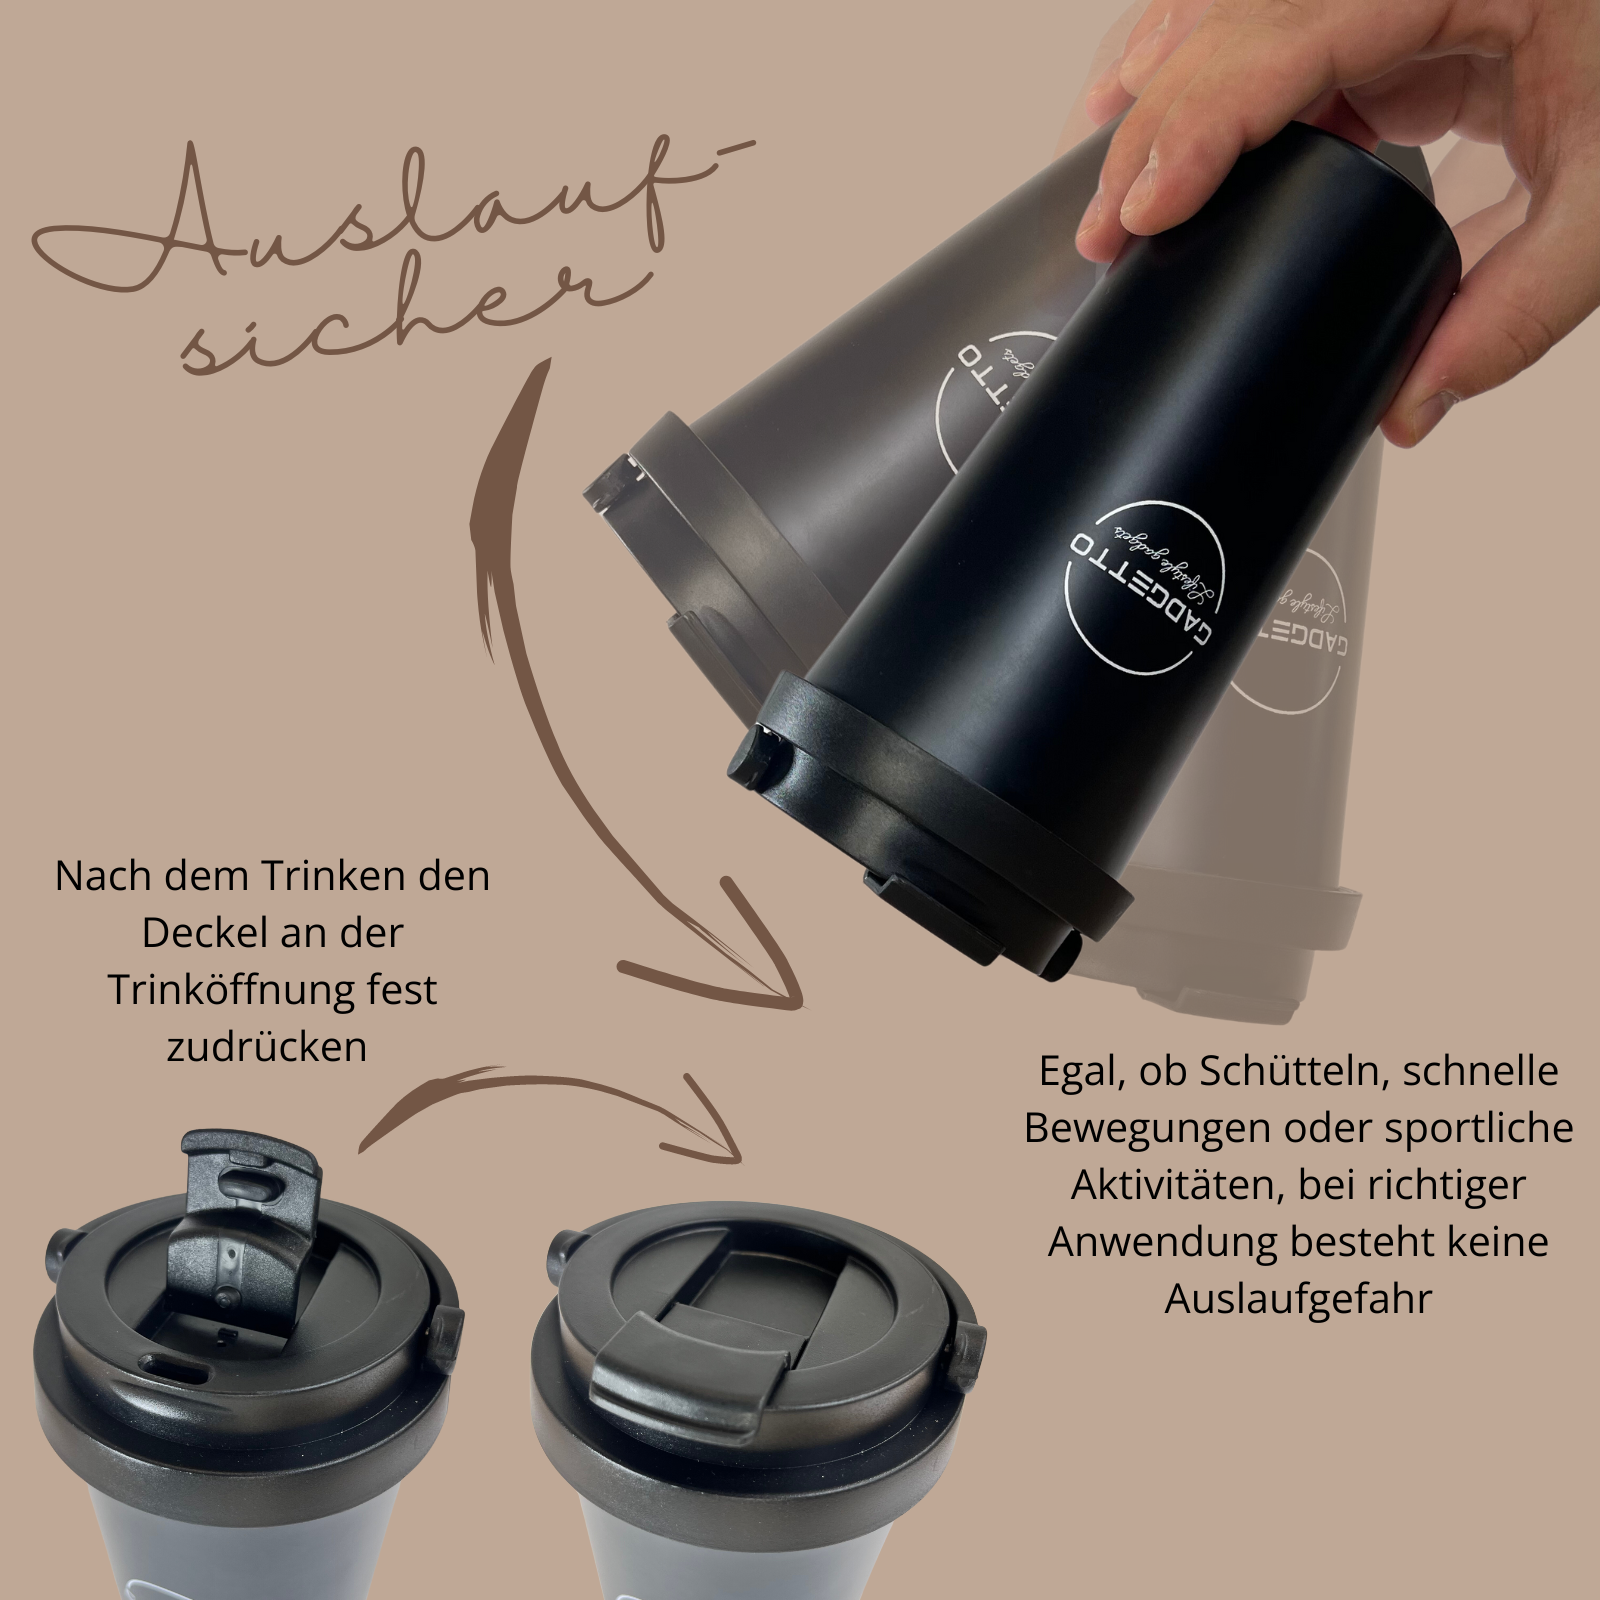 Cupholder Set 3-teilig (inkl. Thermobecher) – GADGETTO Products